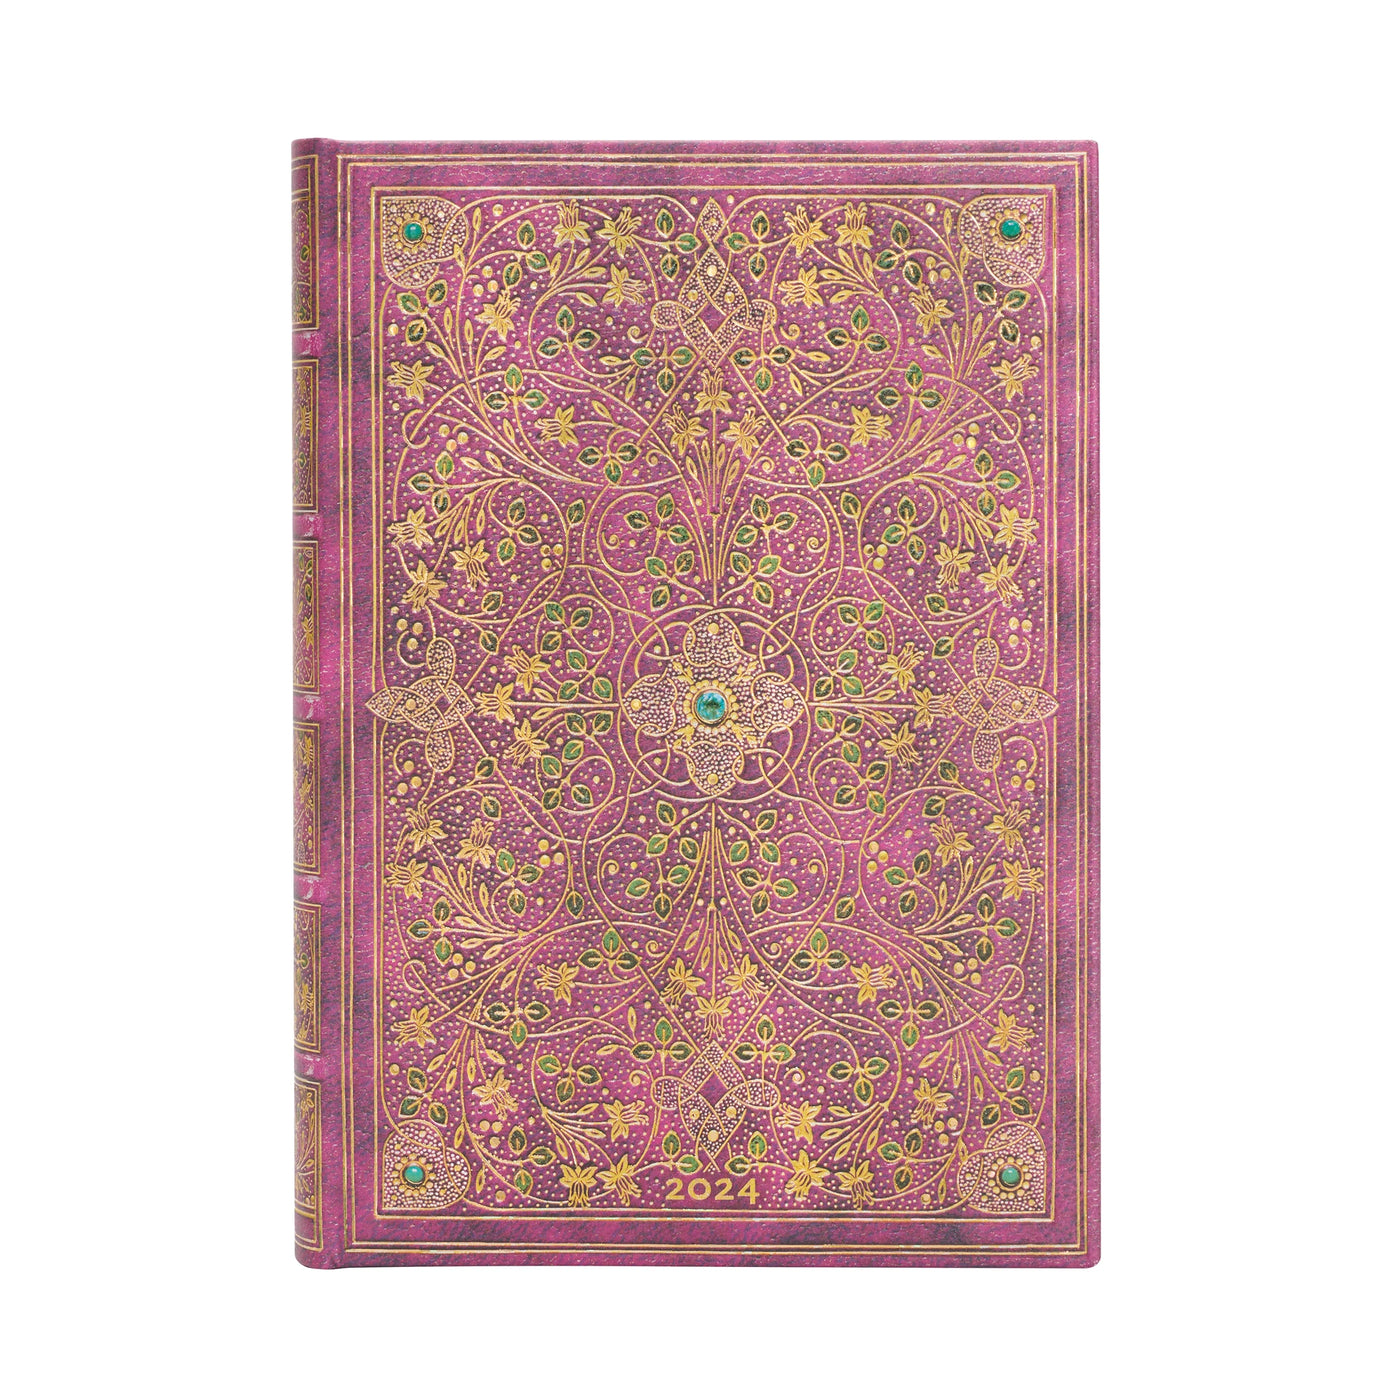 Paperblanks Midi Diamond Jubilee 2024 Day-At-A-Time Planner